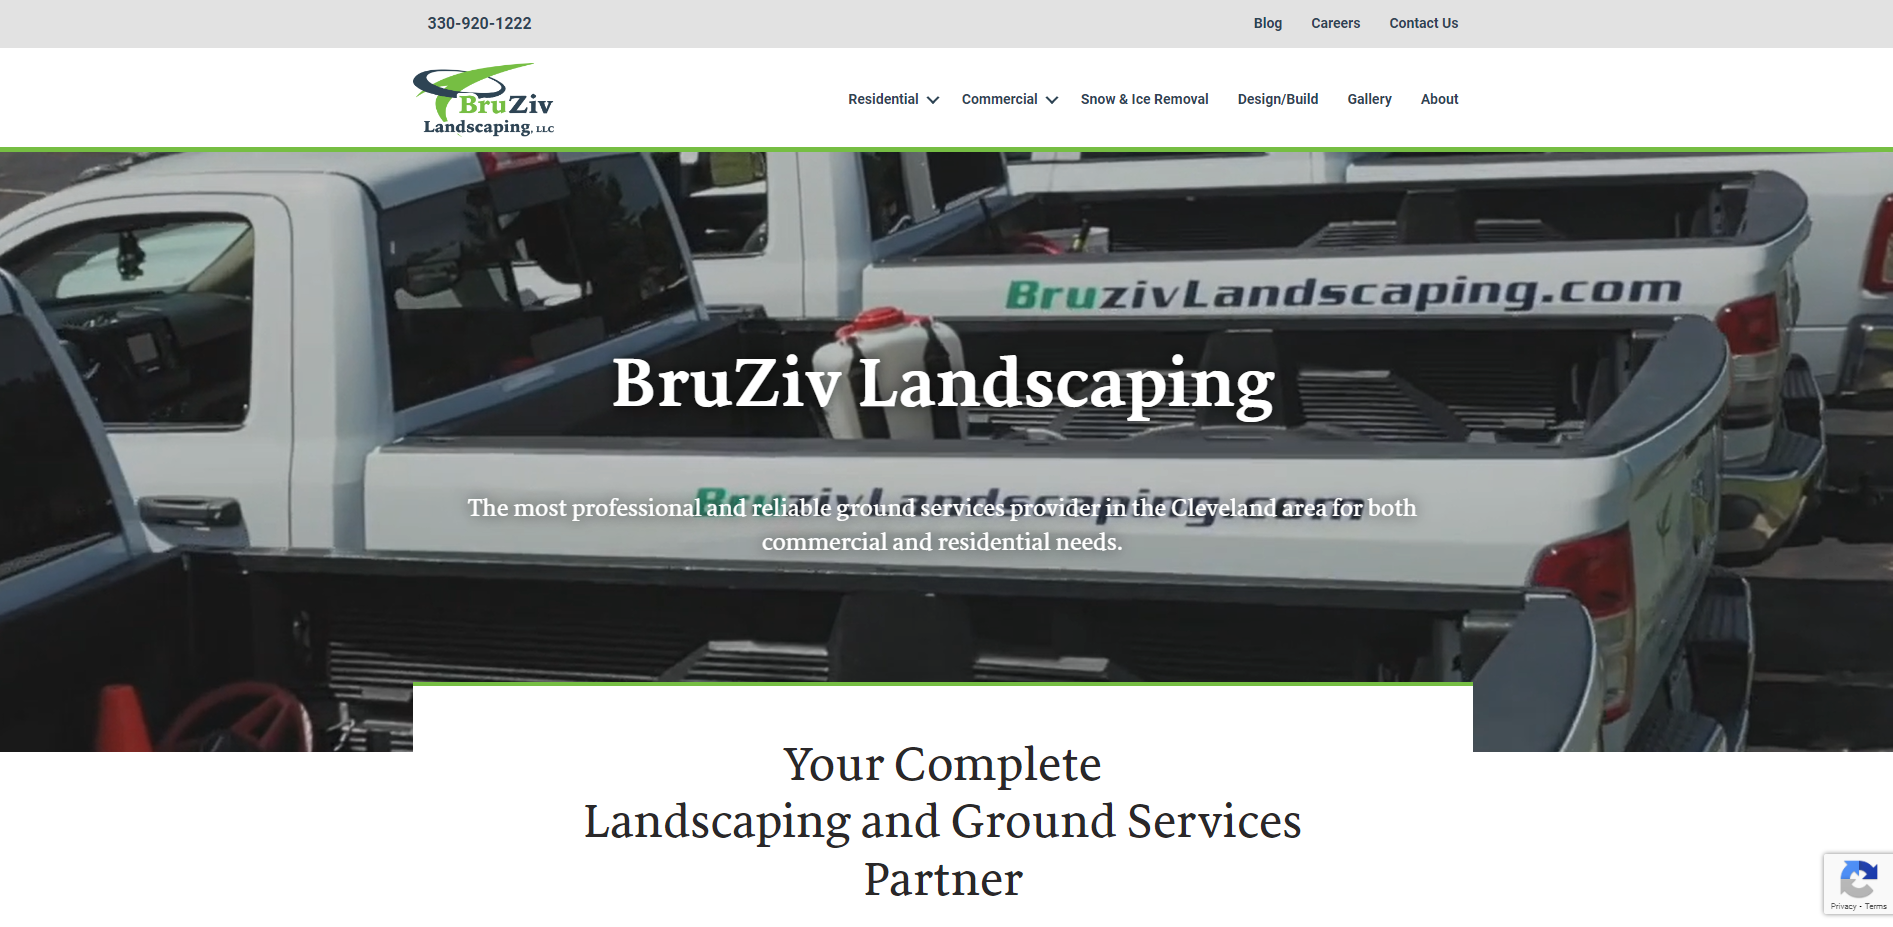 Announcing the Launch of the new Bruziv Landscaping Website